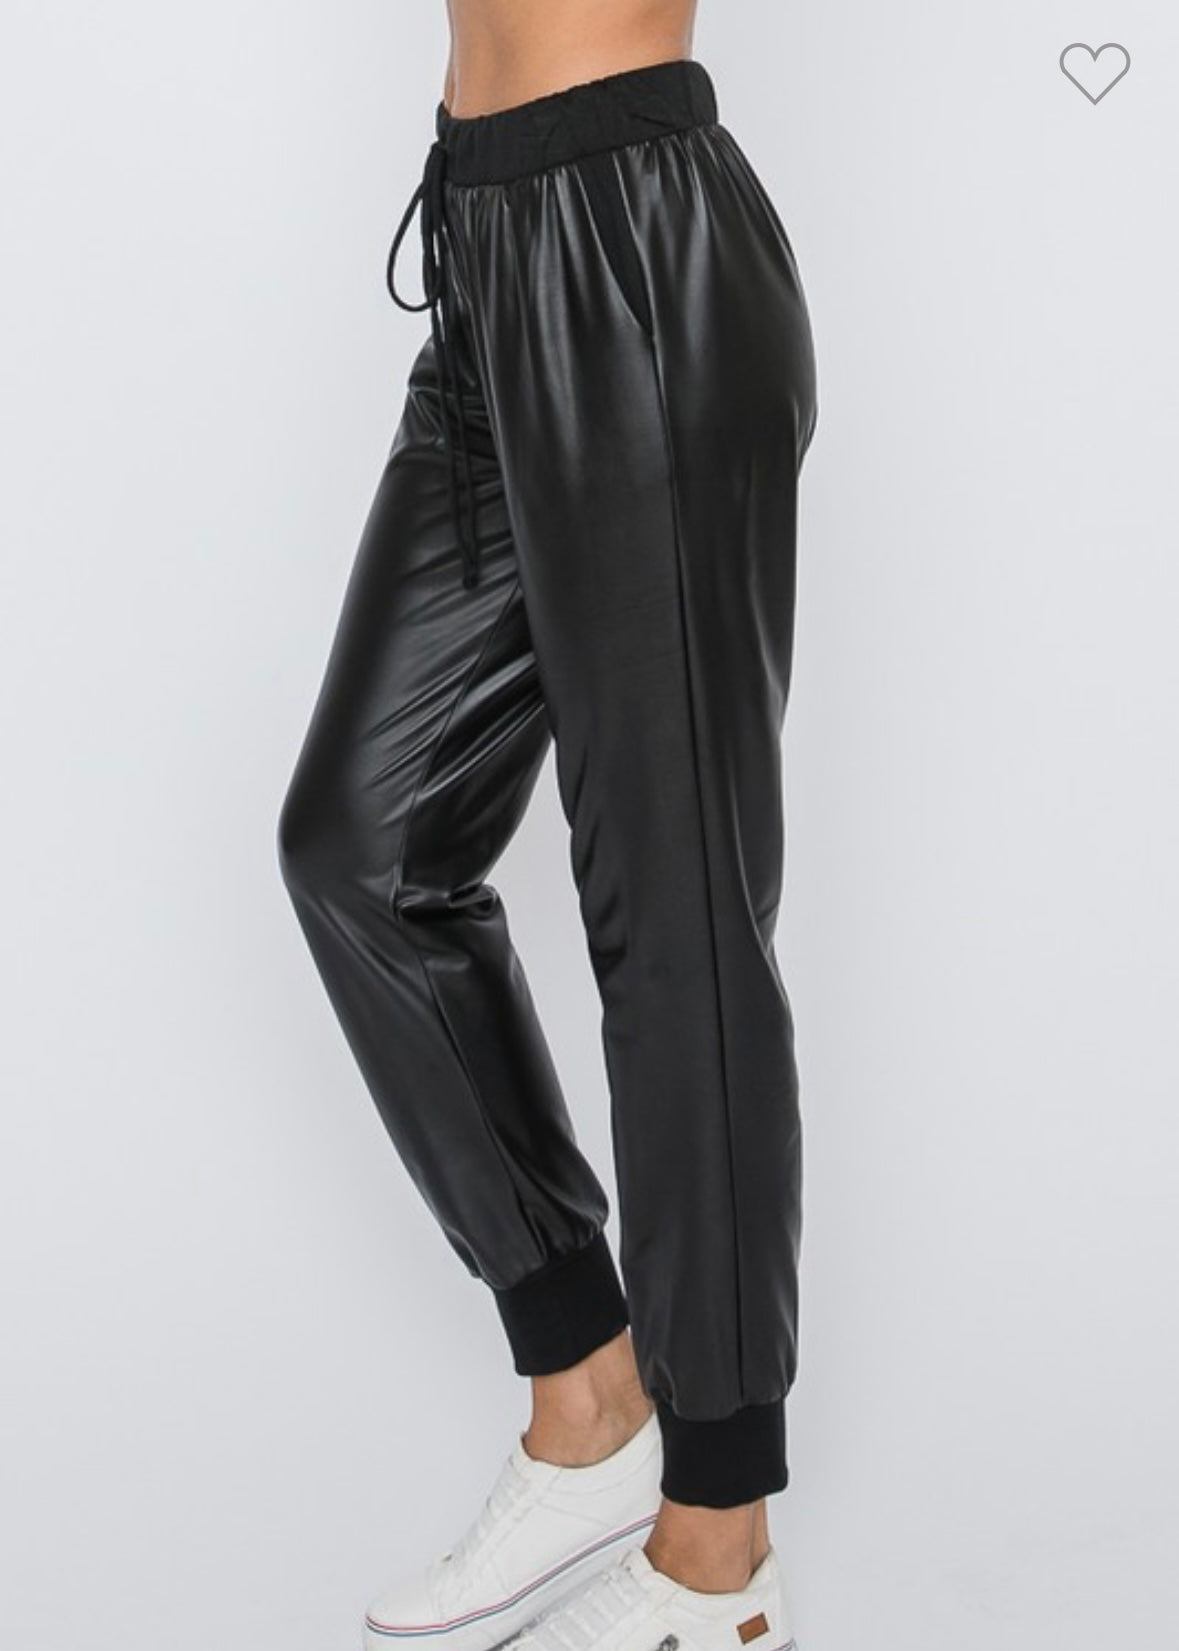 EVERYTHING’S POSSIBLE Black faux leather joggers